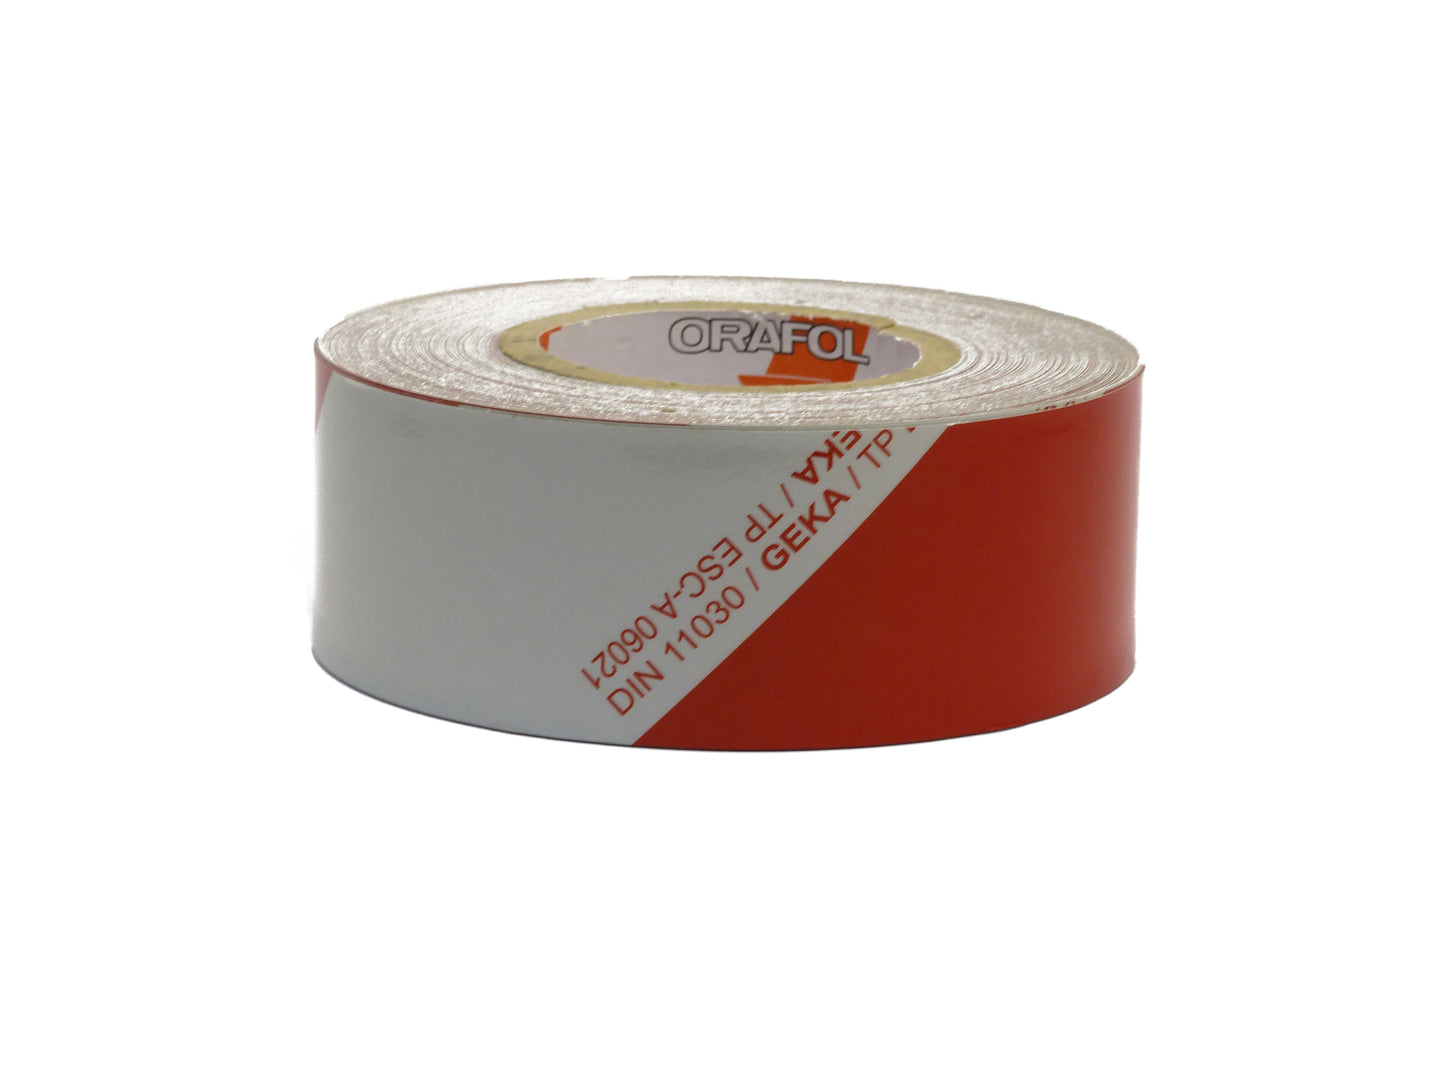 Reflective foil roll self adhesive 60mm pointing left